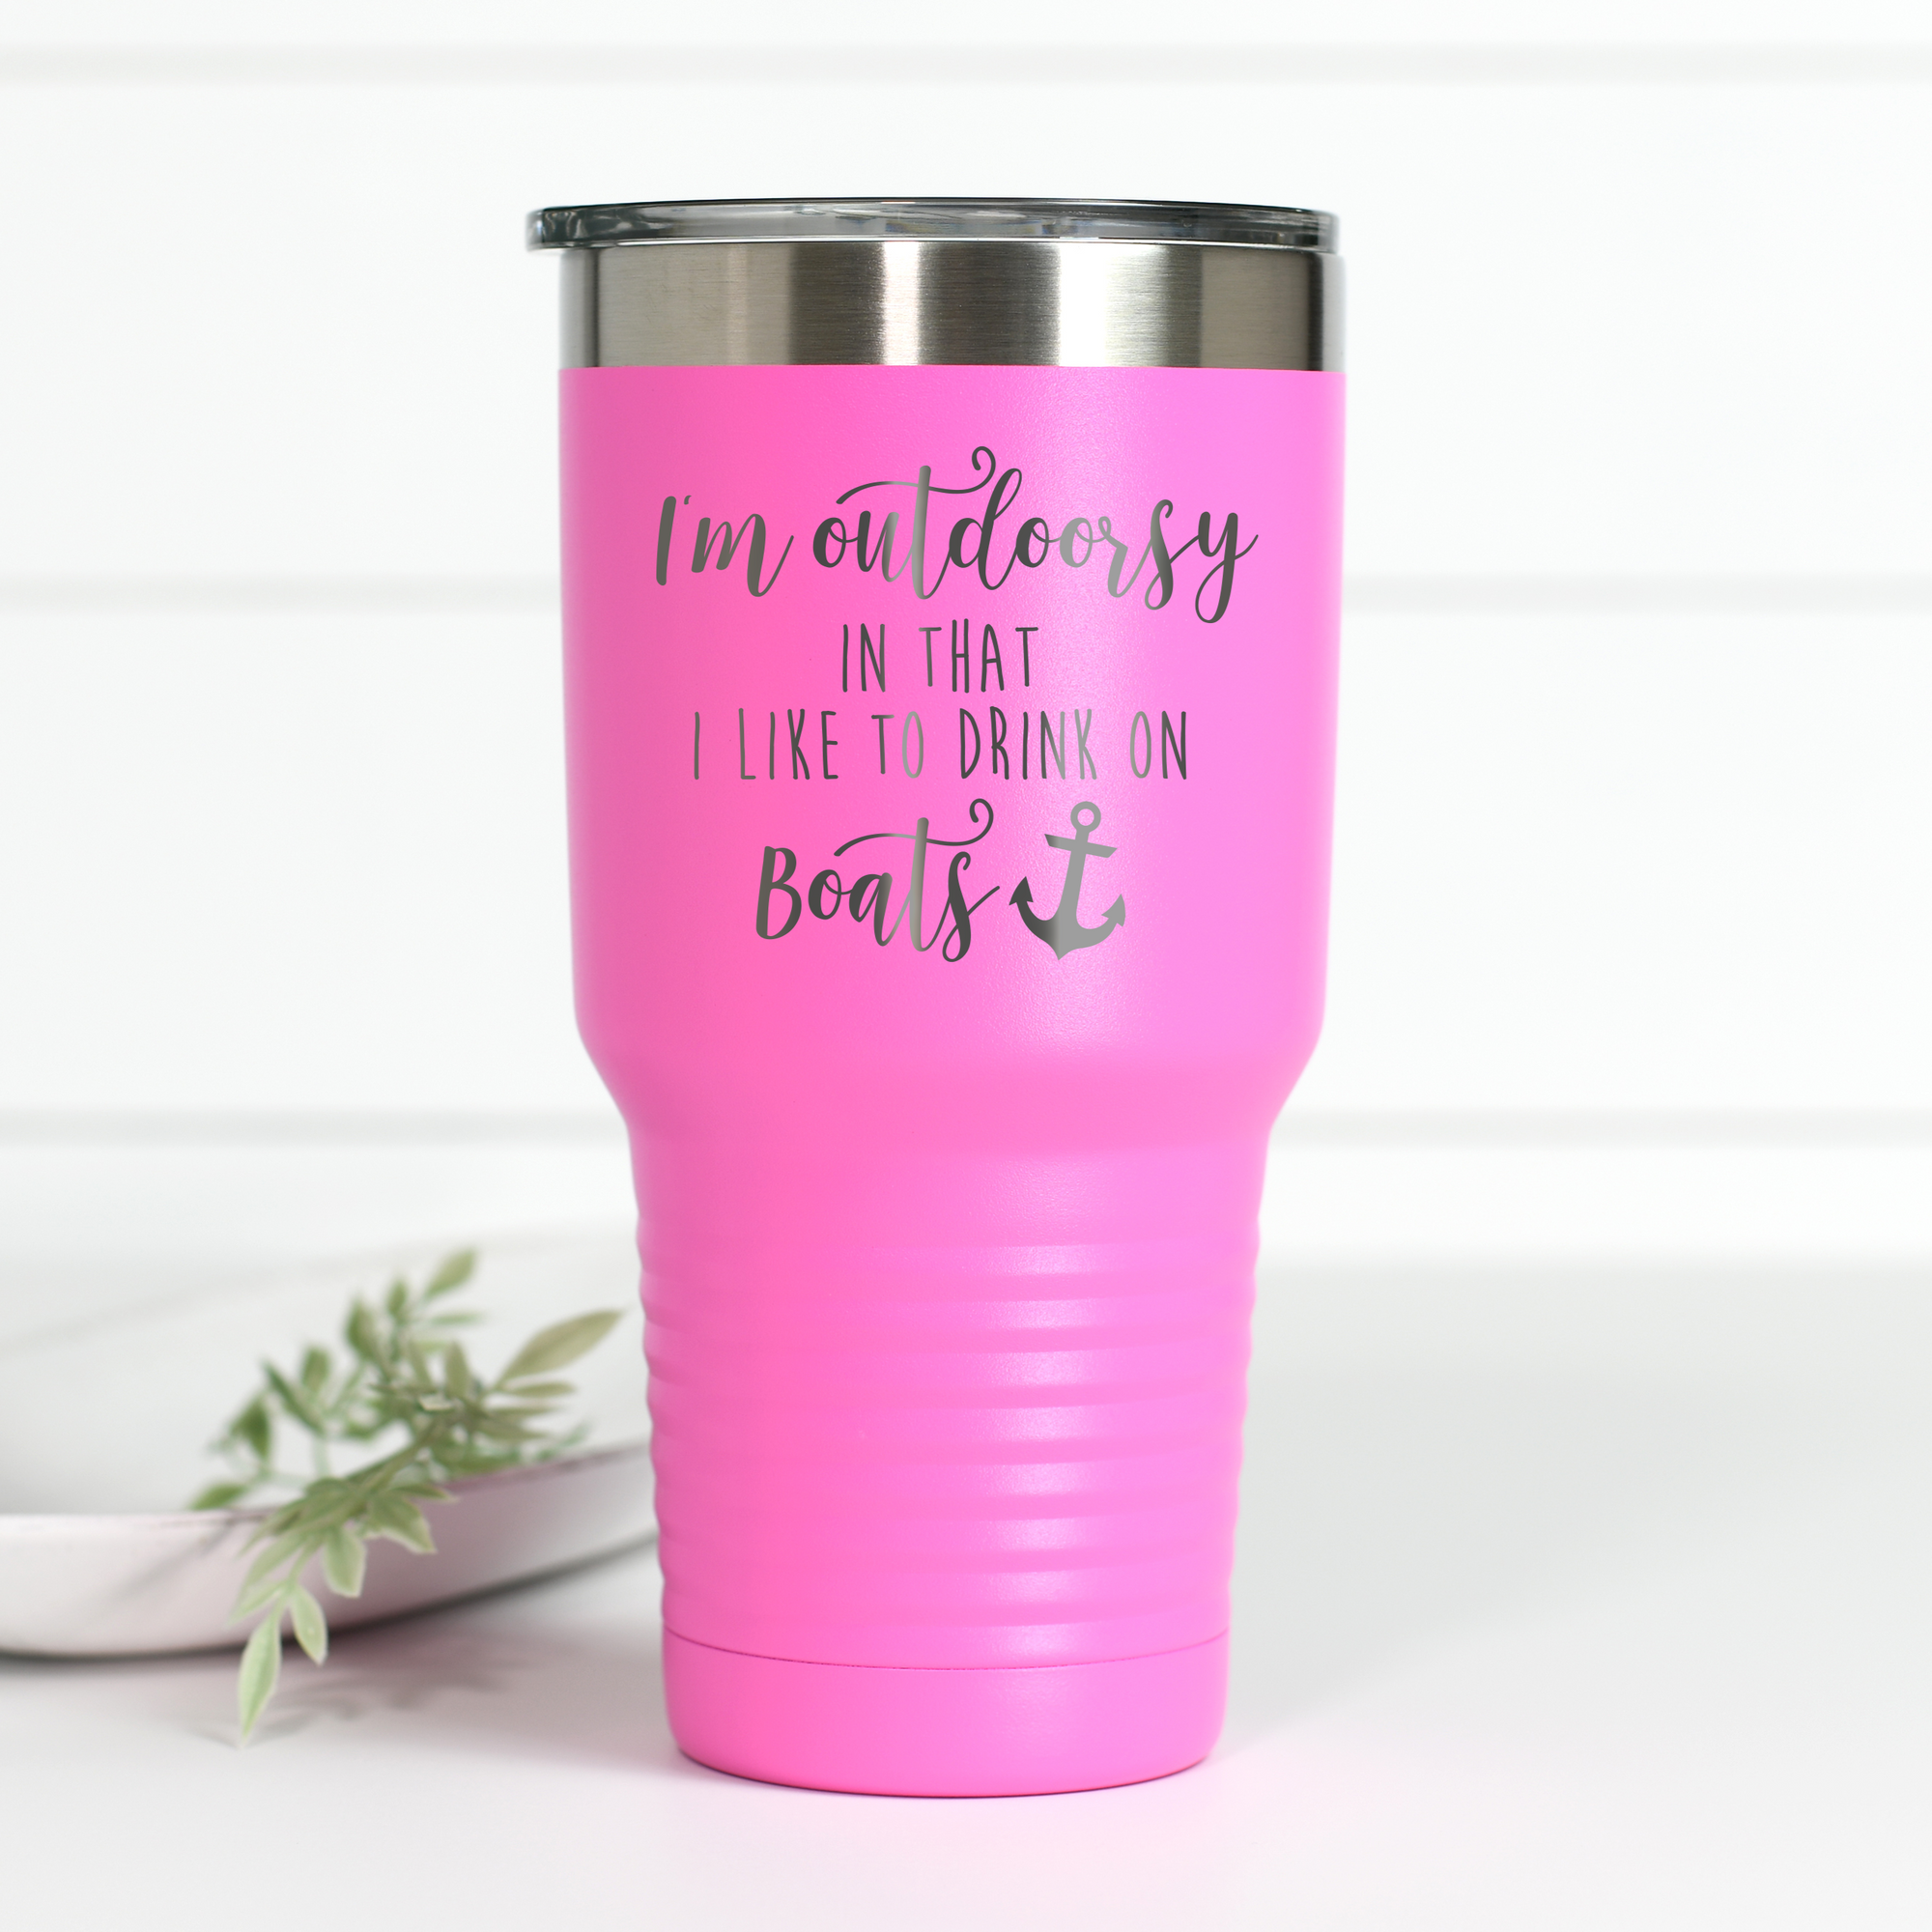 Outdoorsy Drink On Boats 30 oz Engraved Tumbler